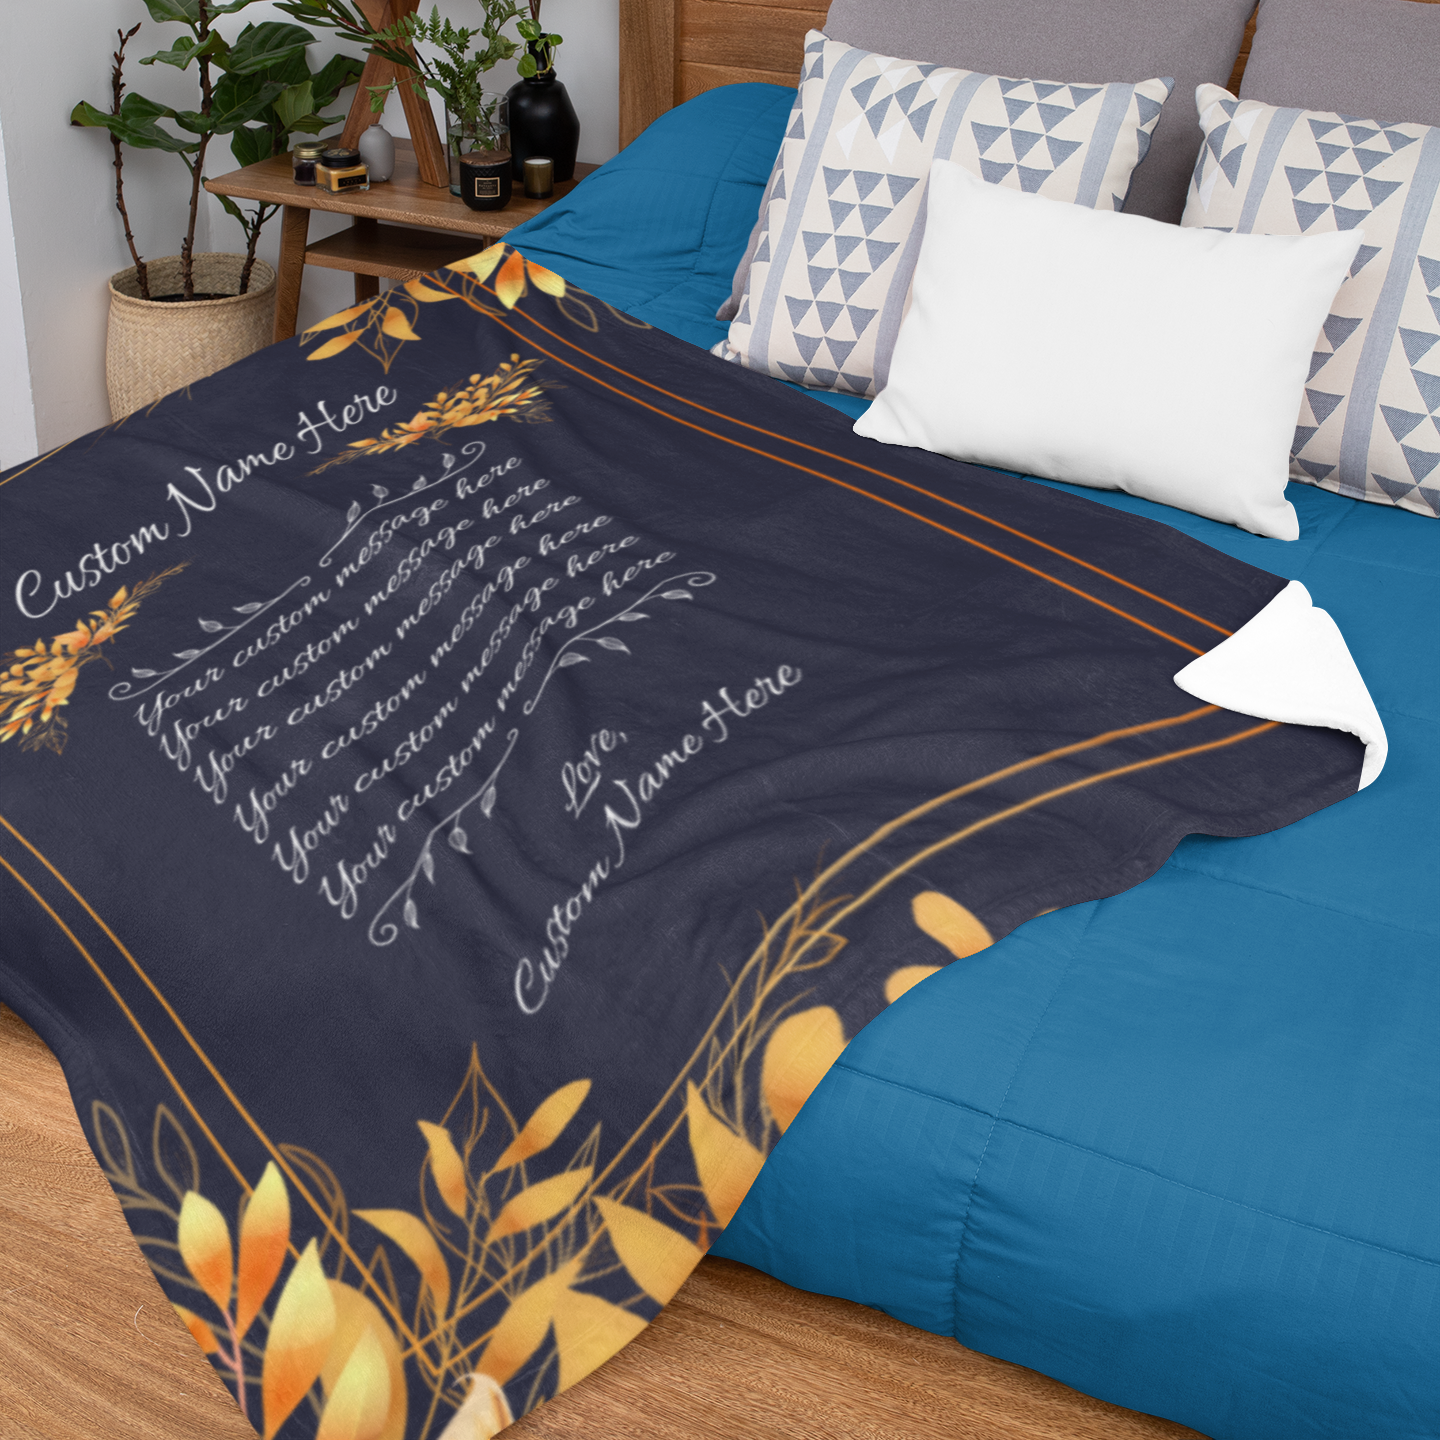 Personalized Note Blanket For Mom: Custom Message Gifts For Mom